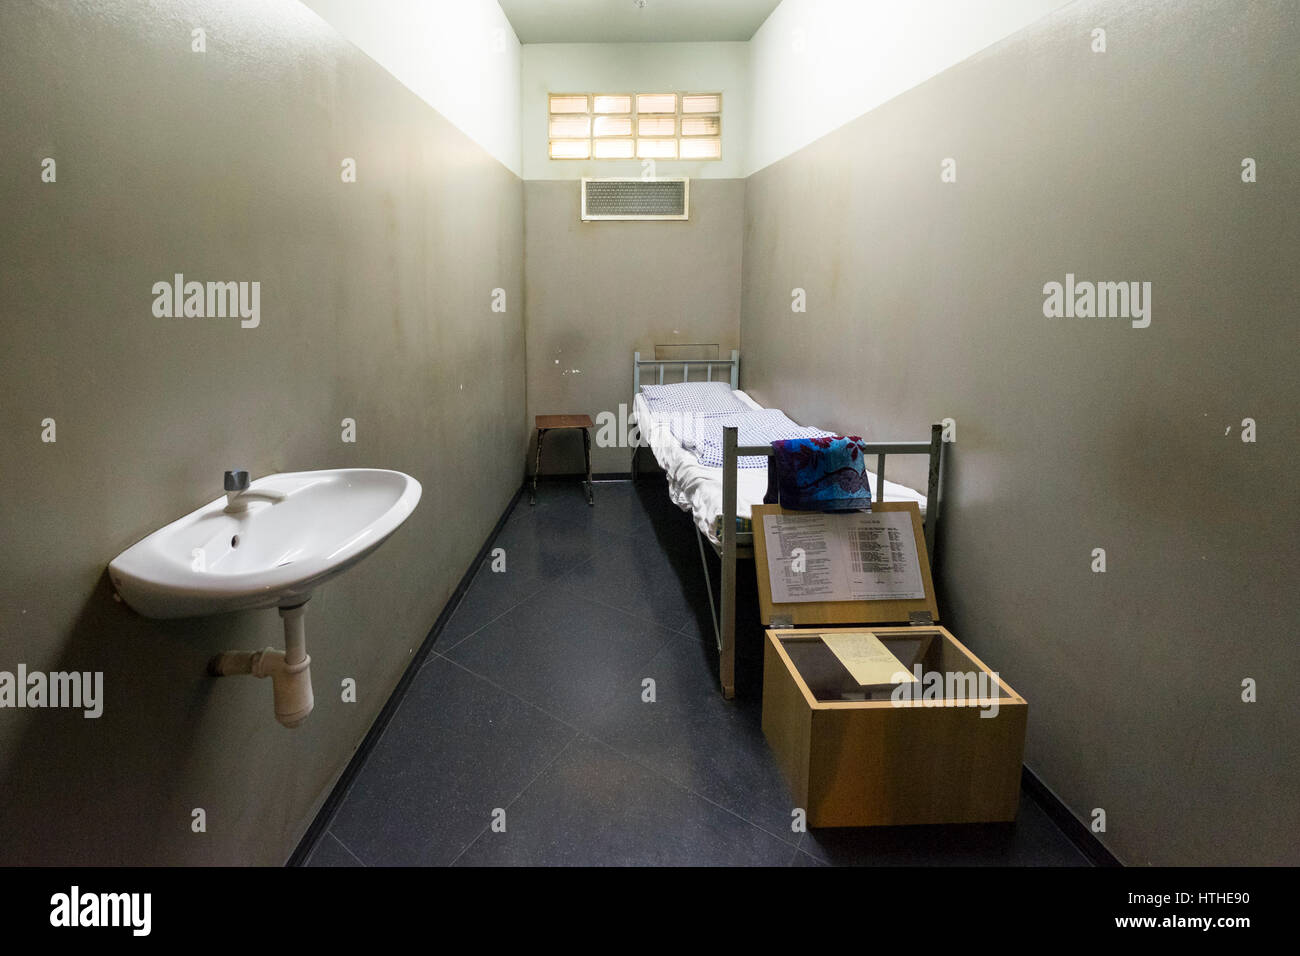 Prison Cell on display at DDR Museum, showing life in former East Germany,  in Mitte Berlin, Germany Stock Photo